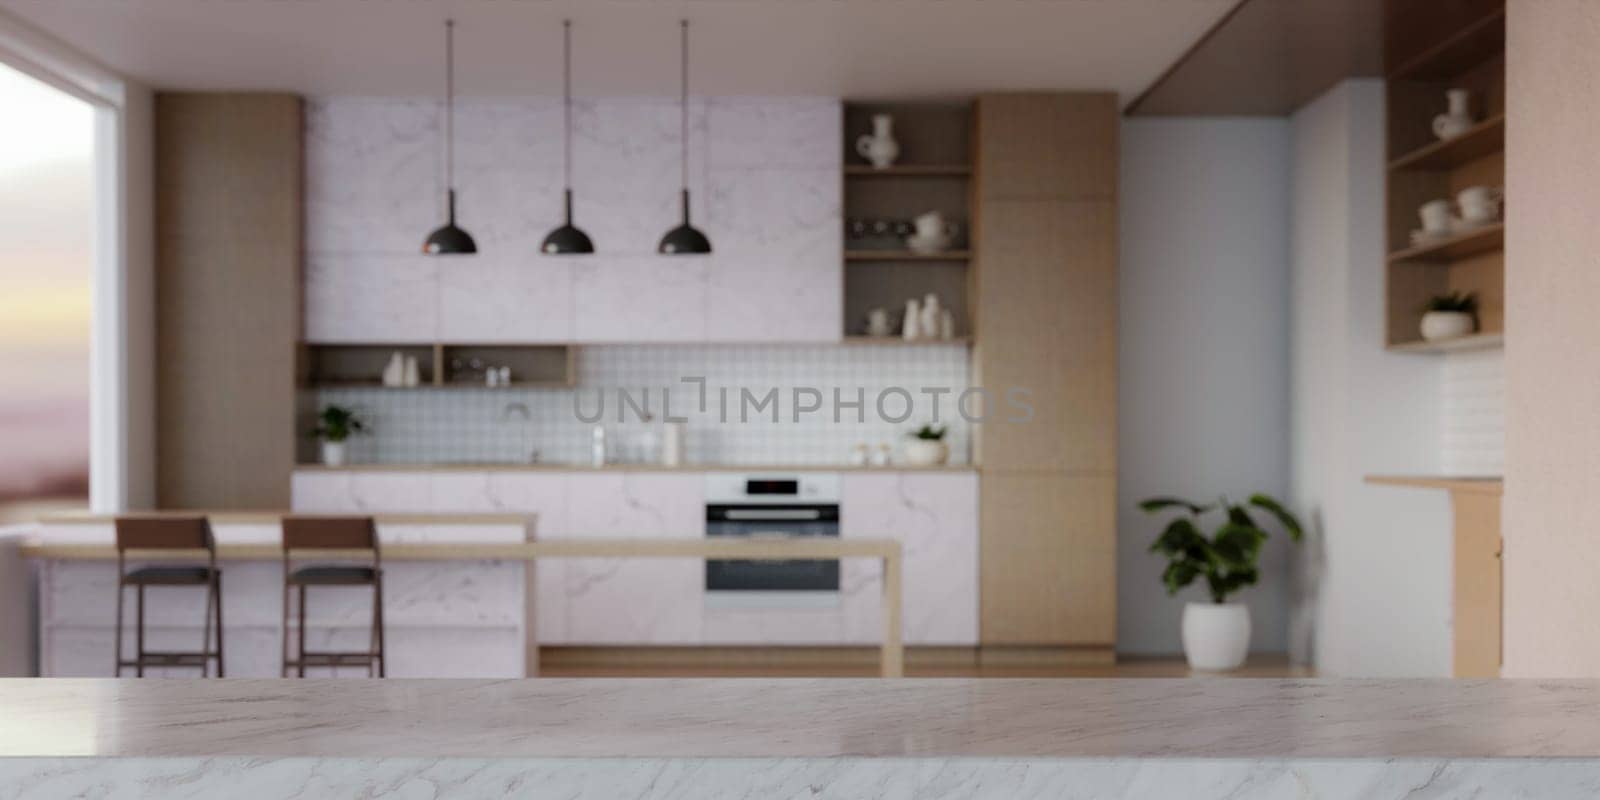 3d Empty space on a white marble kitchen tabletop in a modern white kitchen. kitchen interior white marble and wood material. 3D render illustration by meepiangraphic